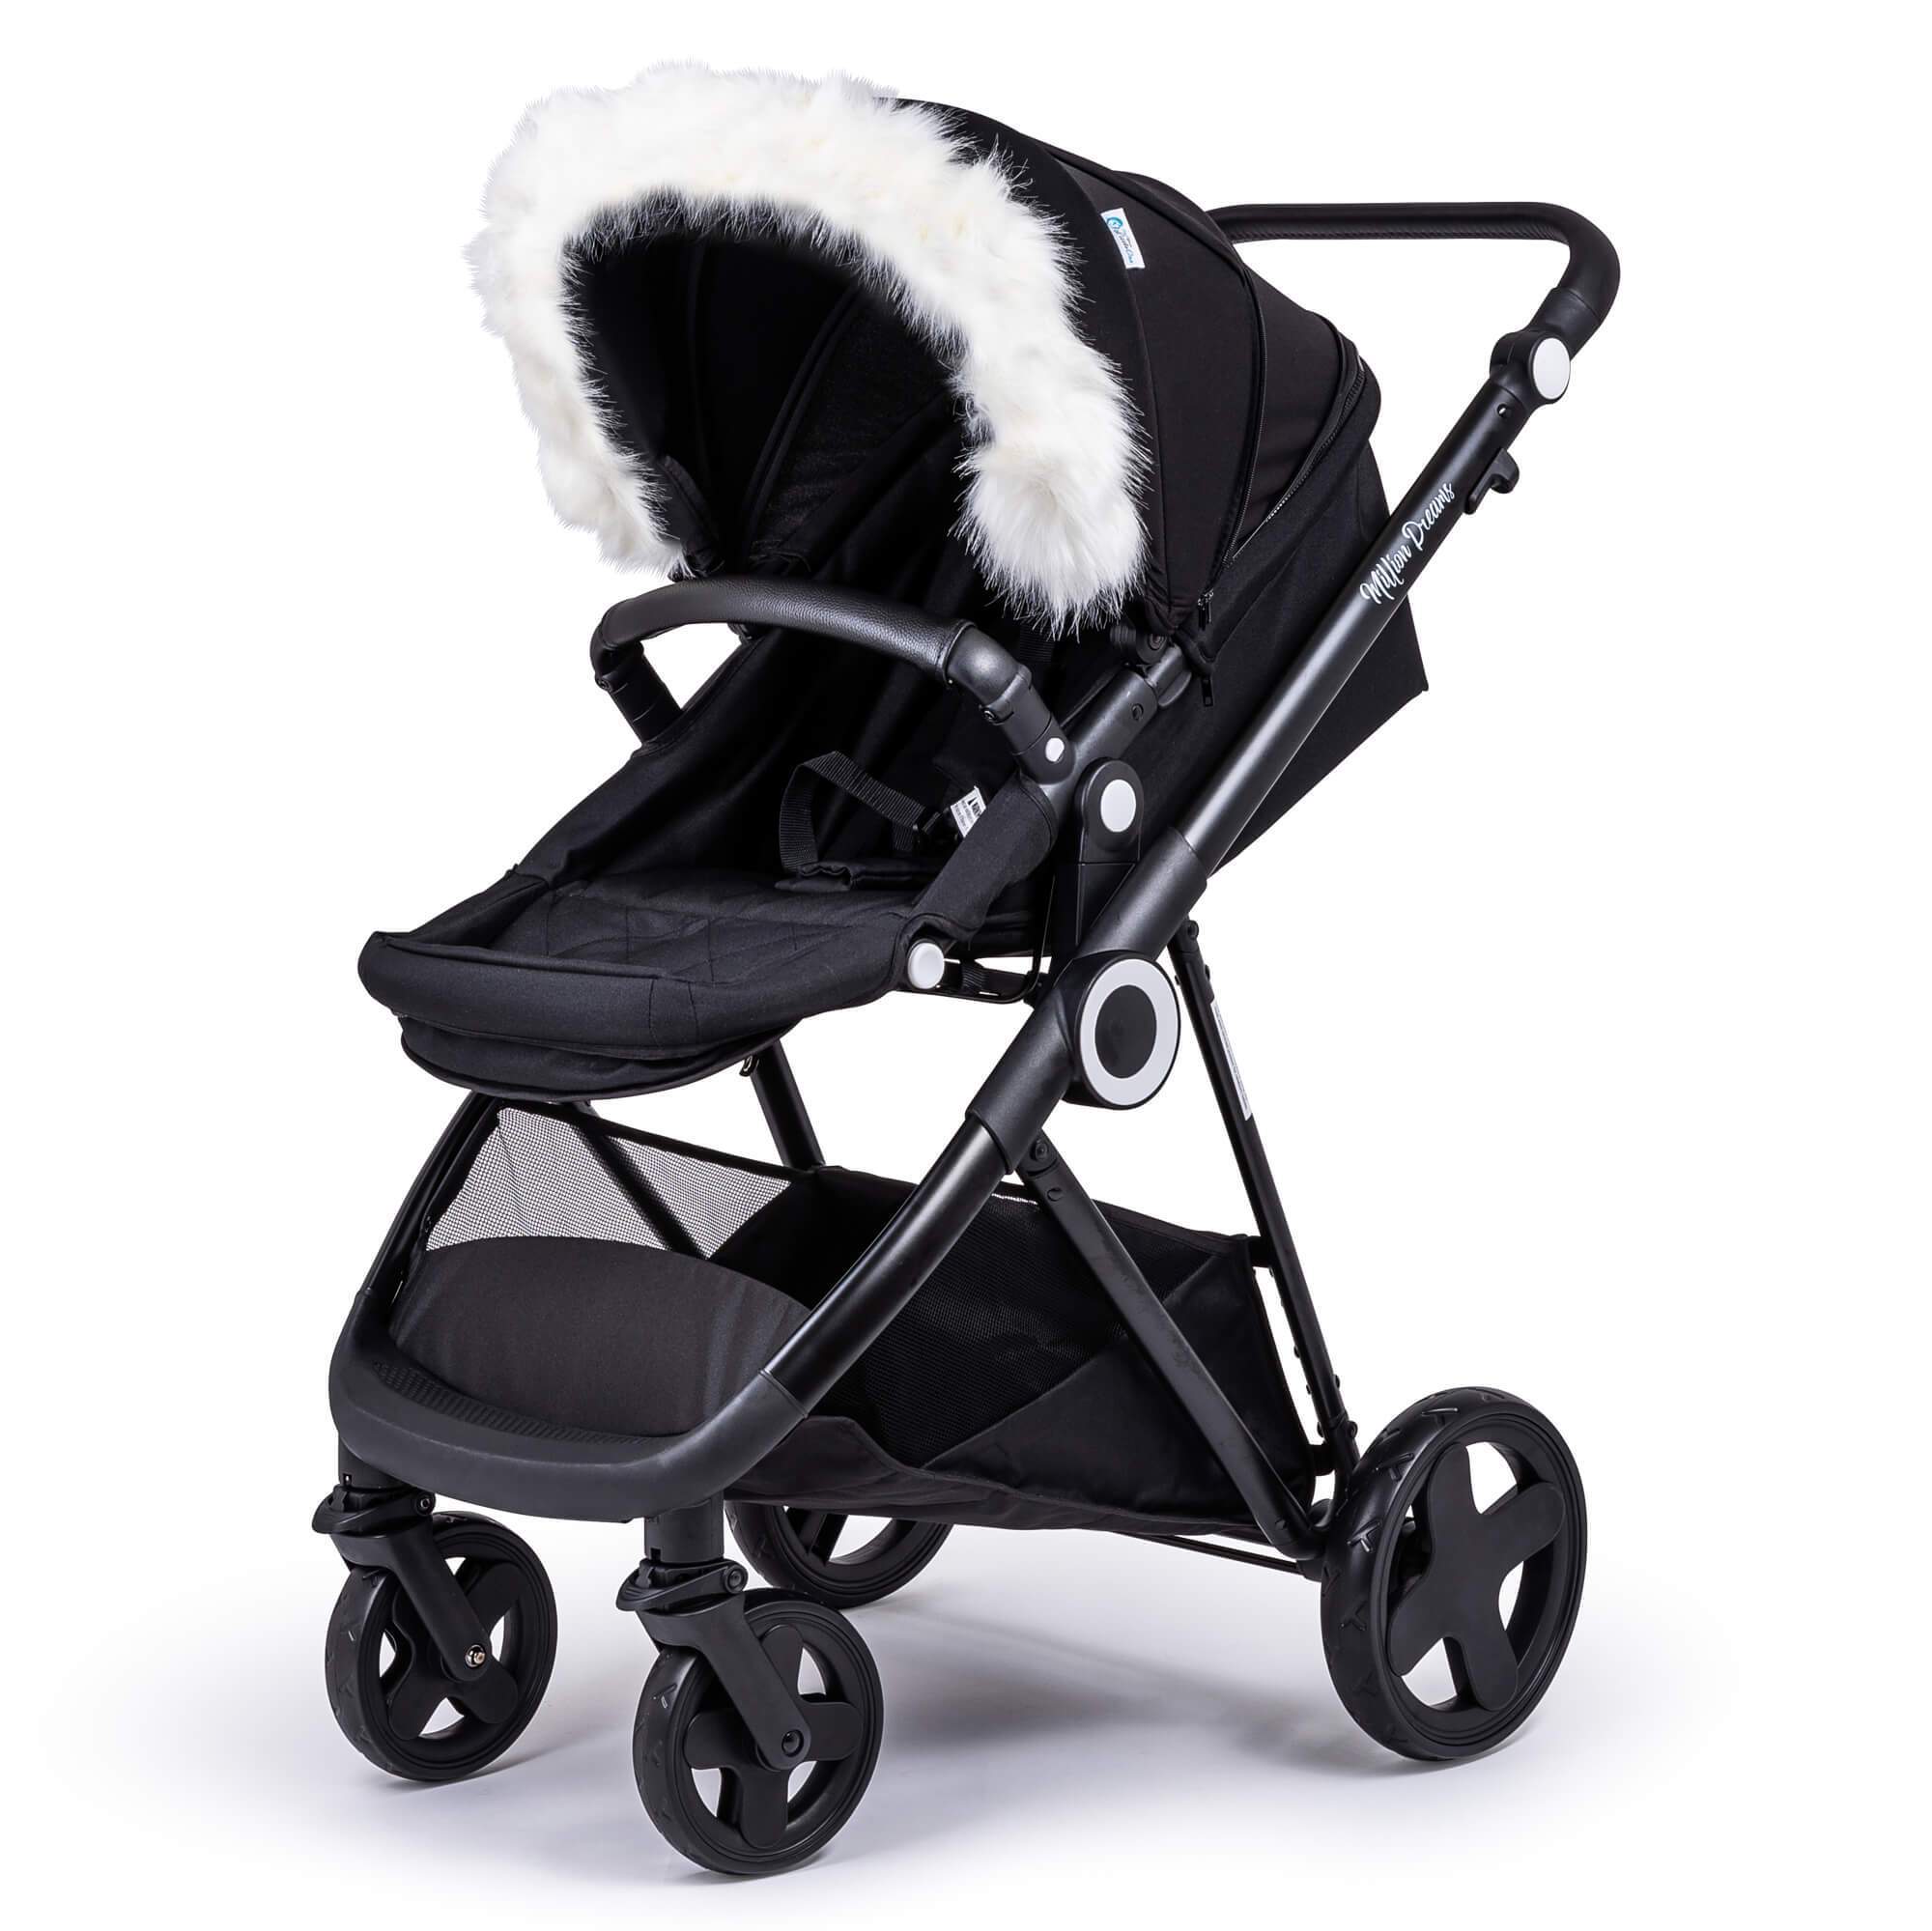 Pram Fur Hood Trim Attachment for Pushchair Compatible with Greentom - White / Fits All Models | For Your Little One